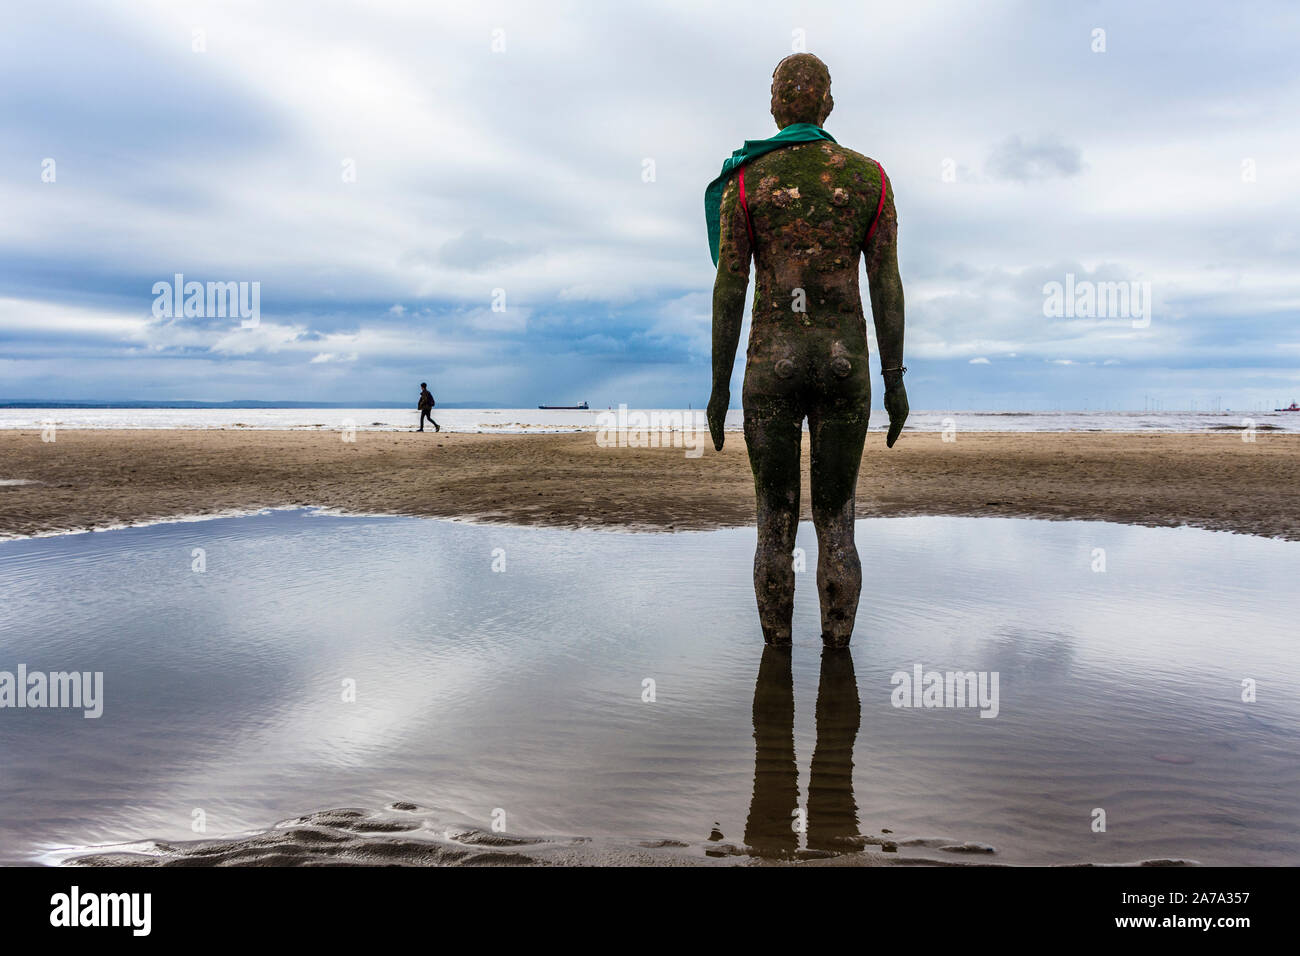 Crosby Beach, permanent home to ‘Another Place’, sculpture by artist, Antony Gormley. Liverpool, UK Stock Photo